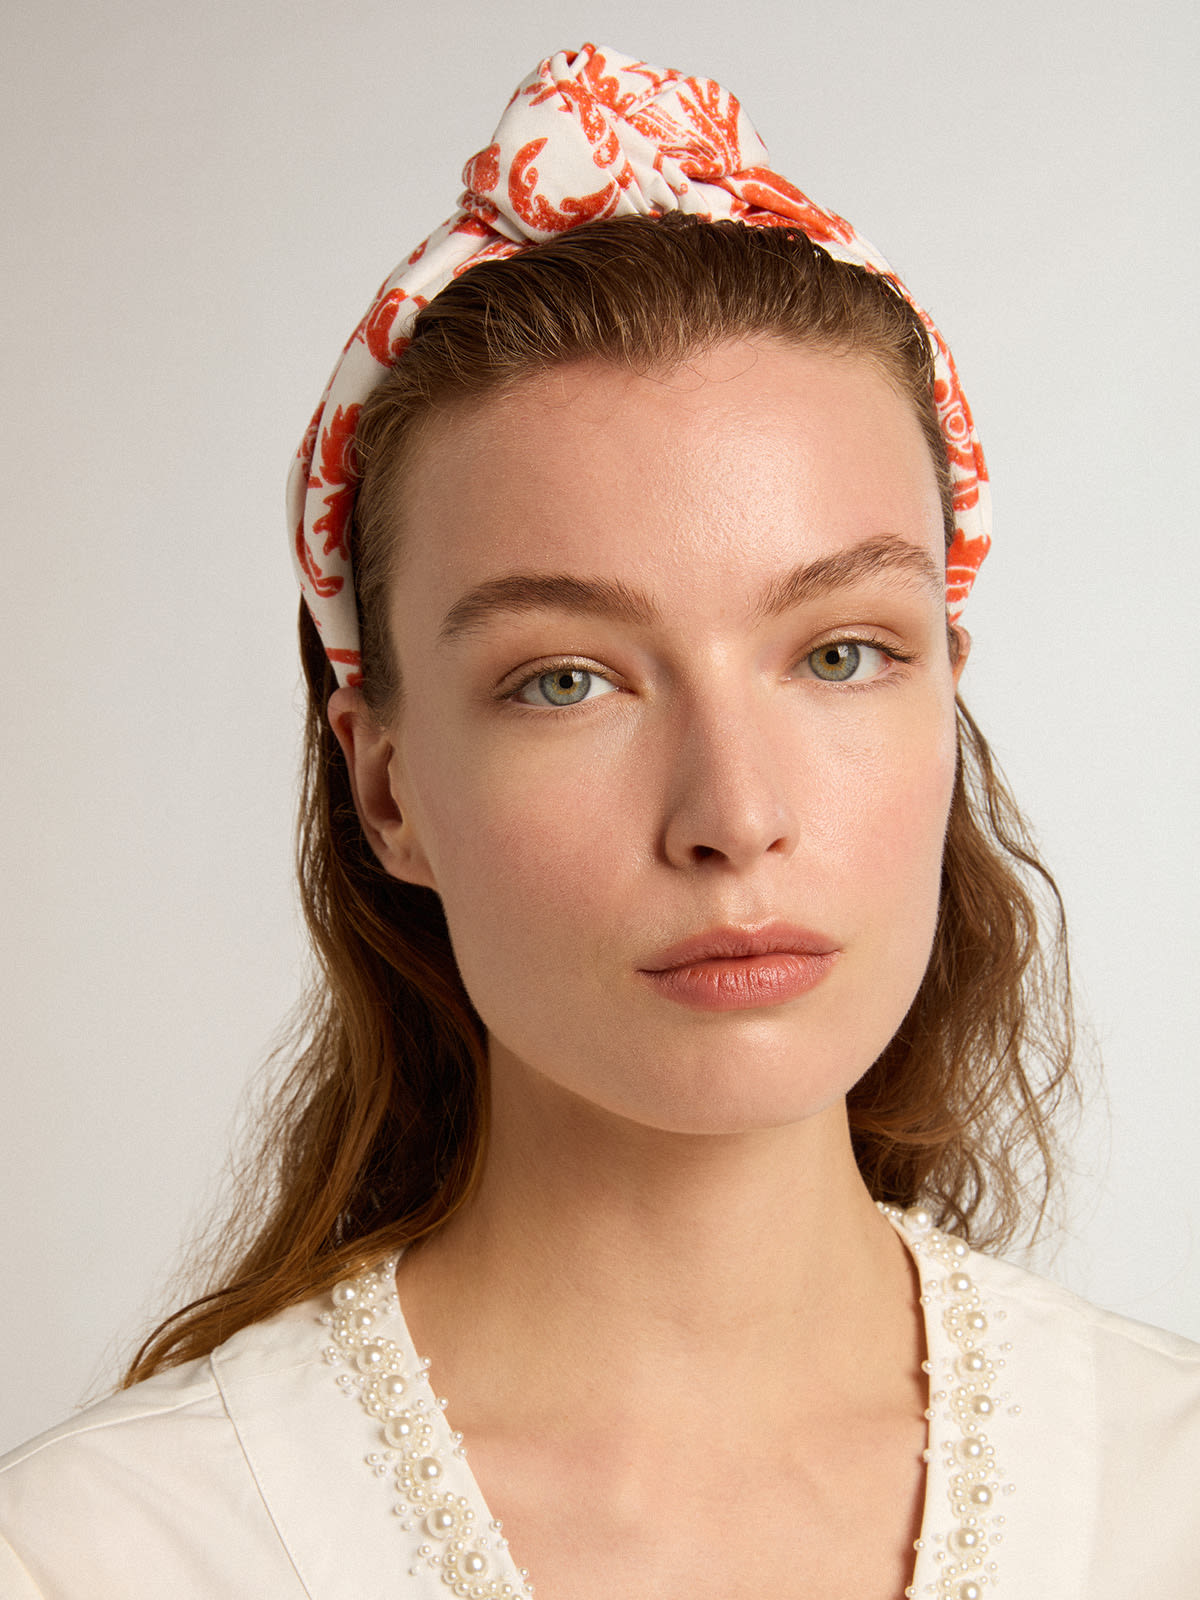 Golden Goose - Coral-red hairband in 